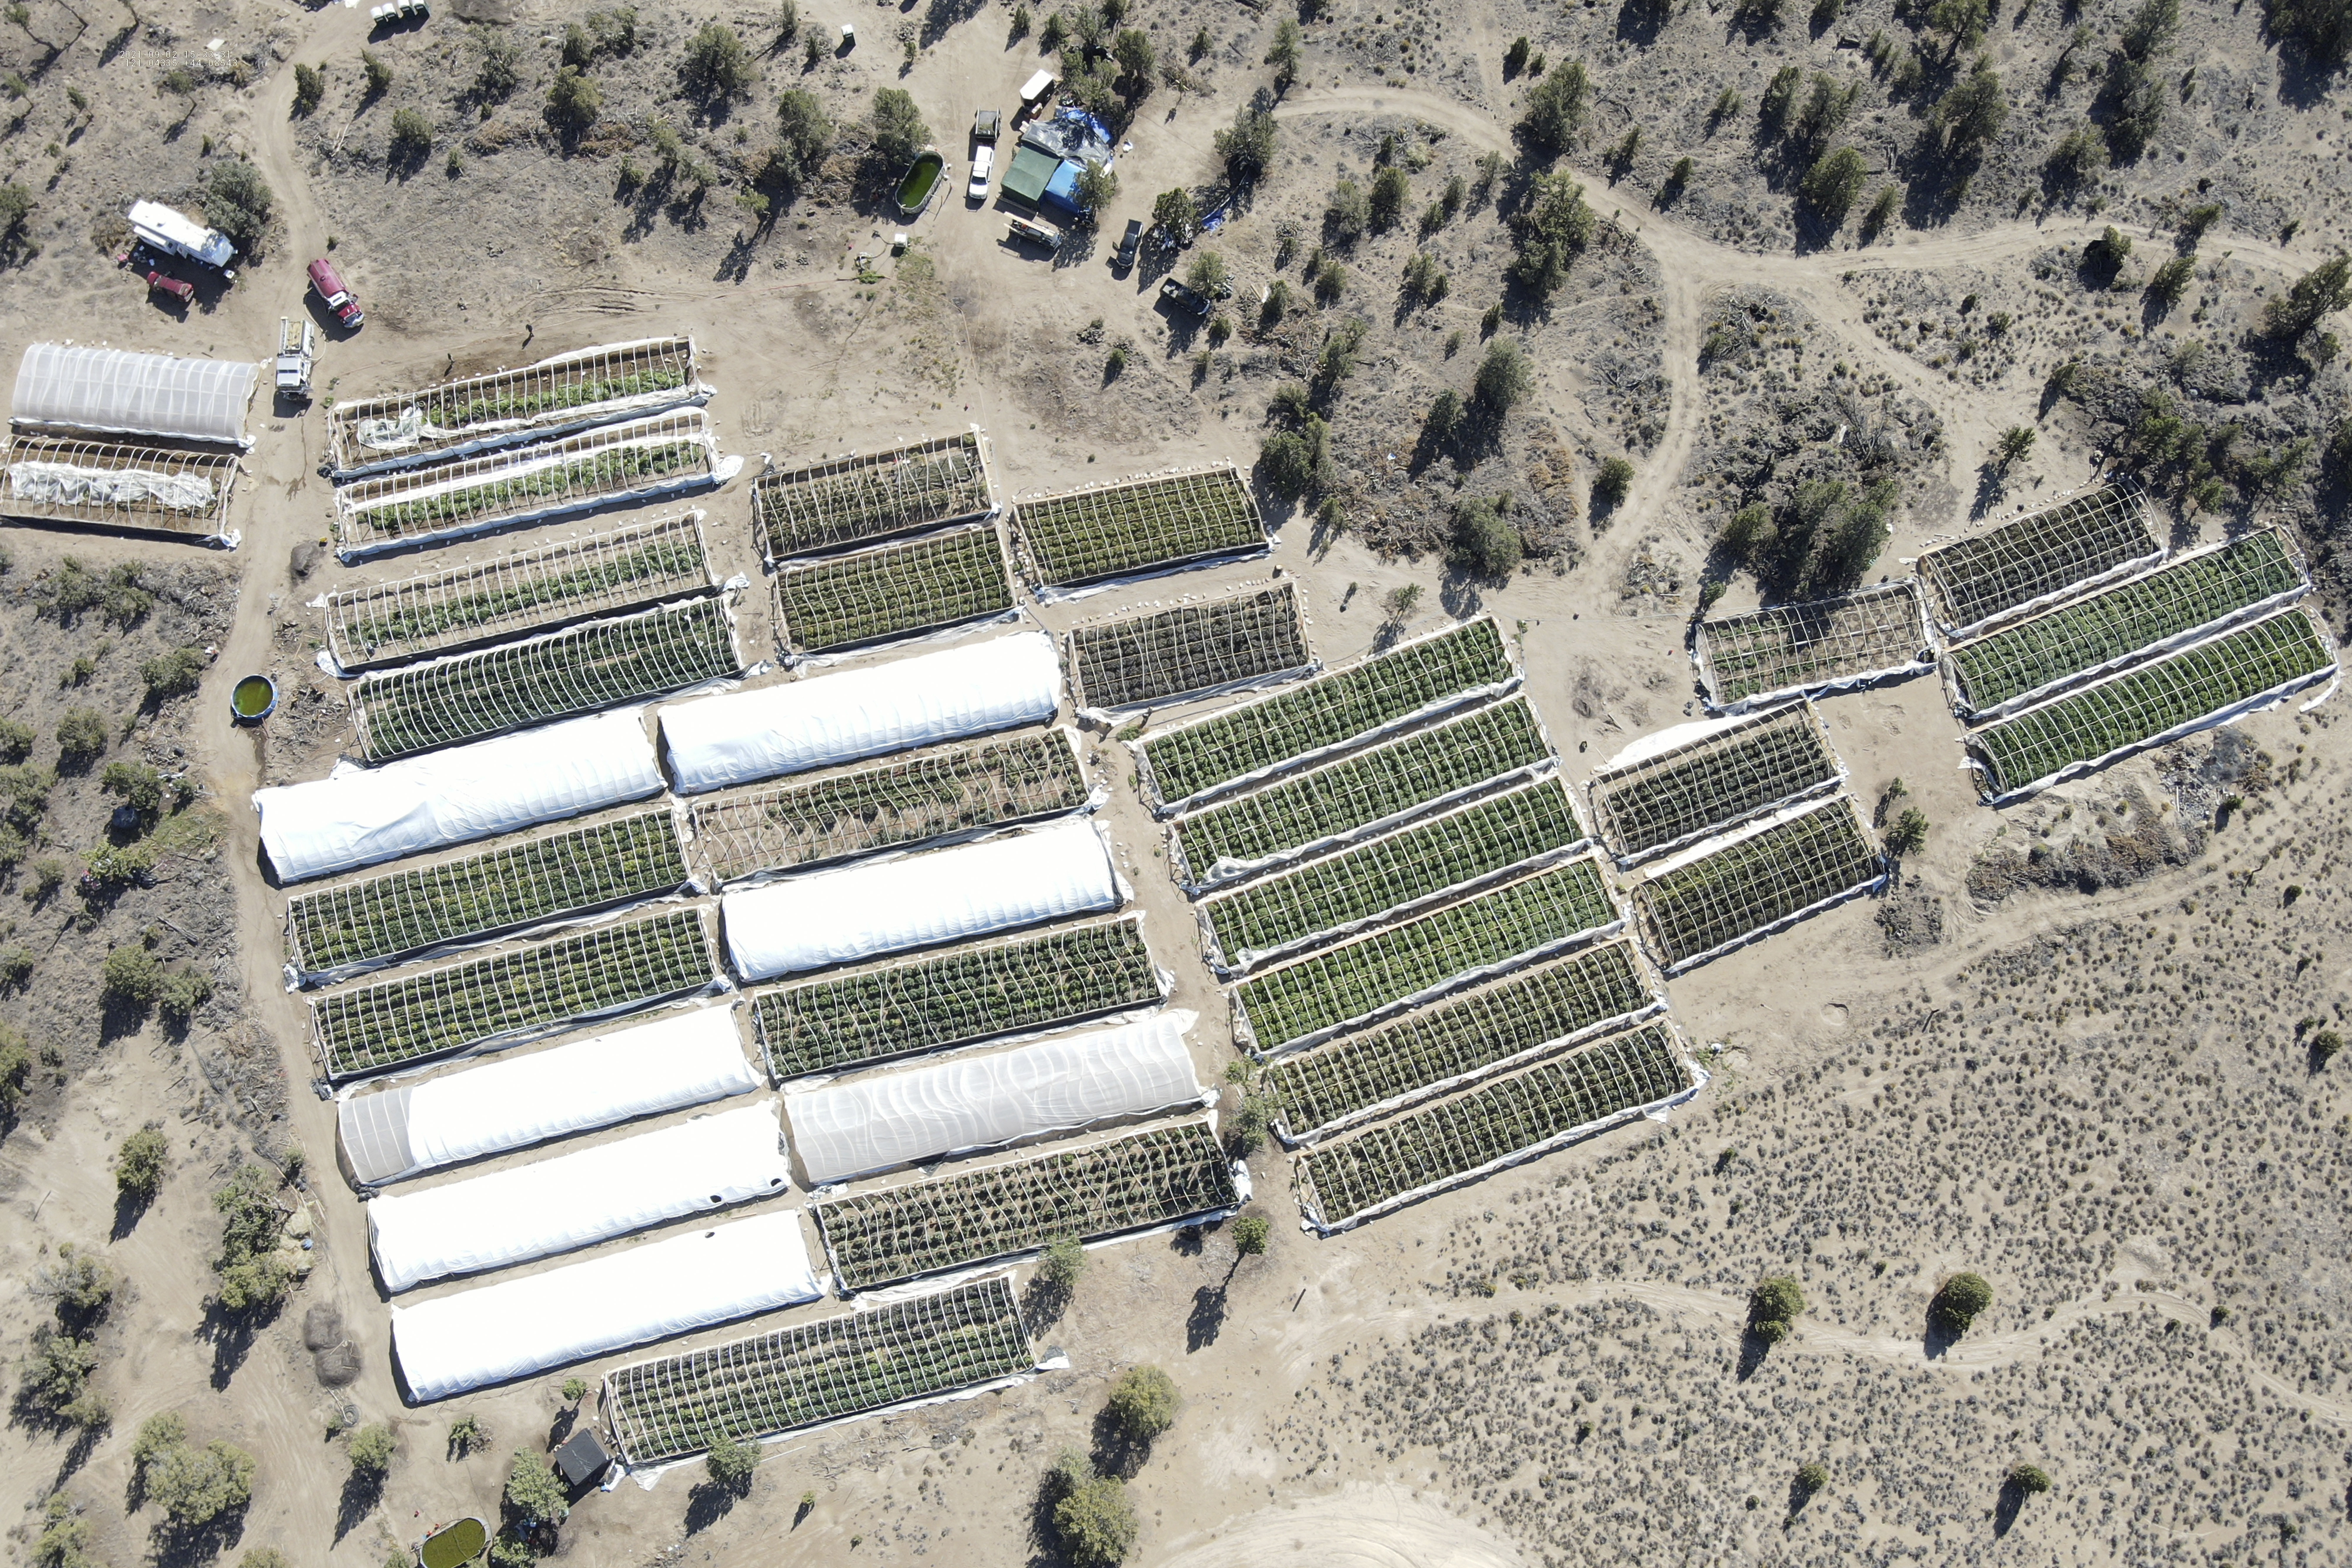 A cannabis grow is seen on Sept. 2, 2021, in an aerial photo taken by the Deschutes County Sheriff's Office in the community of Alfalfa, Ore.